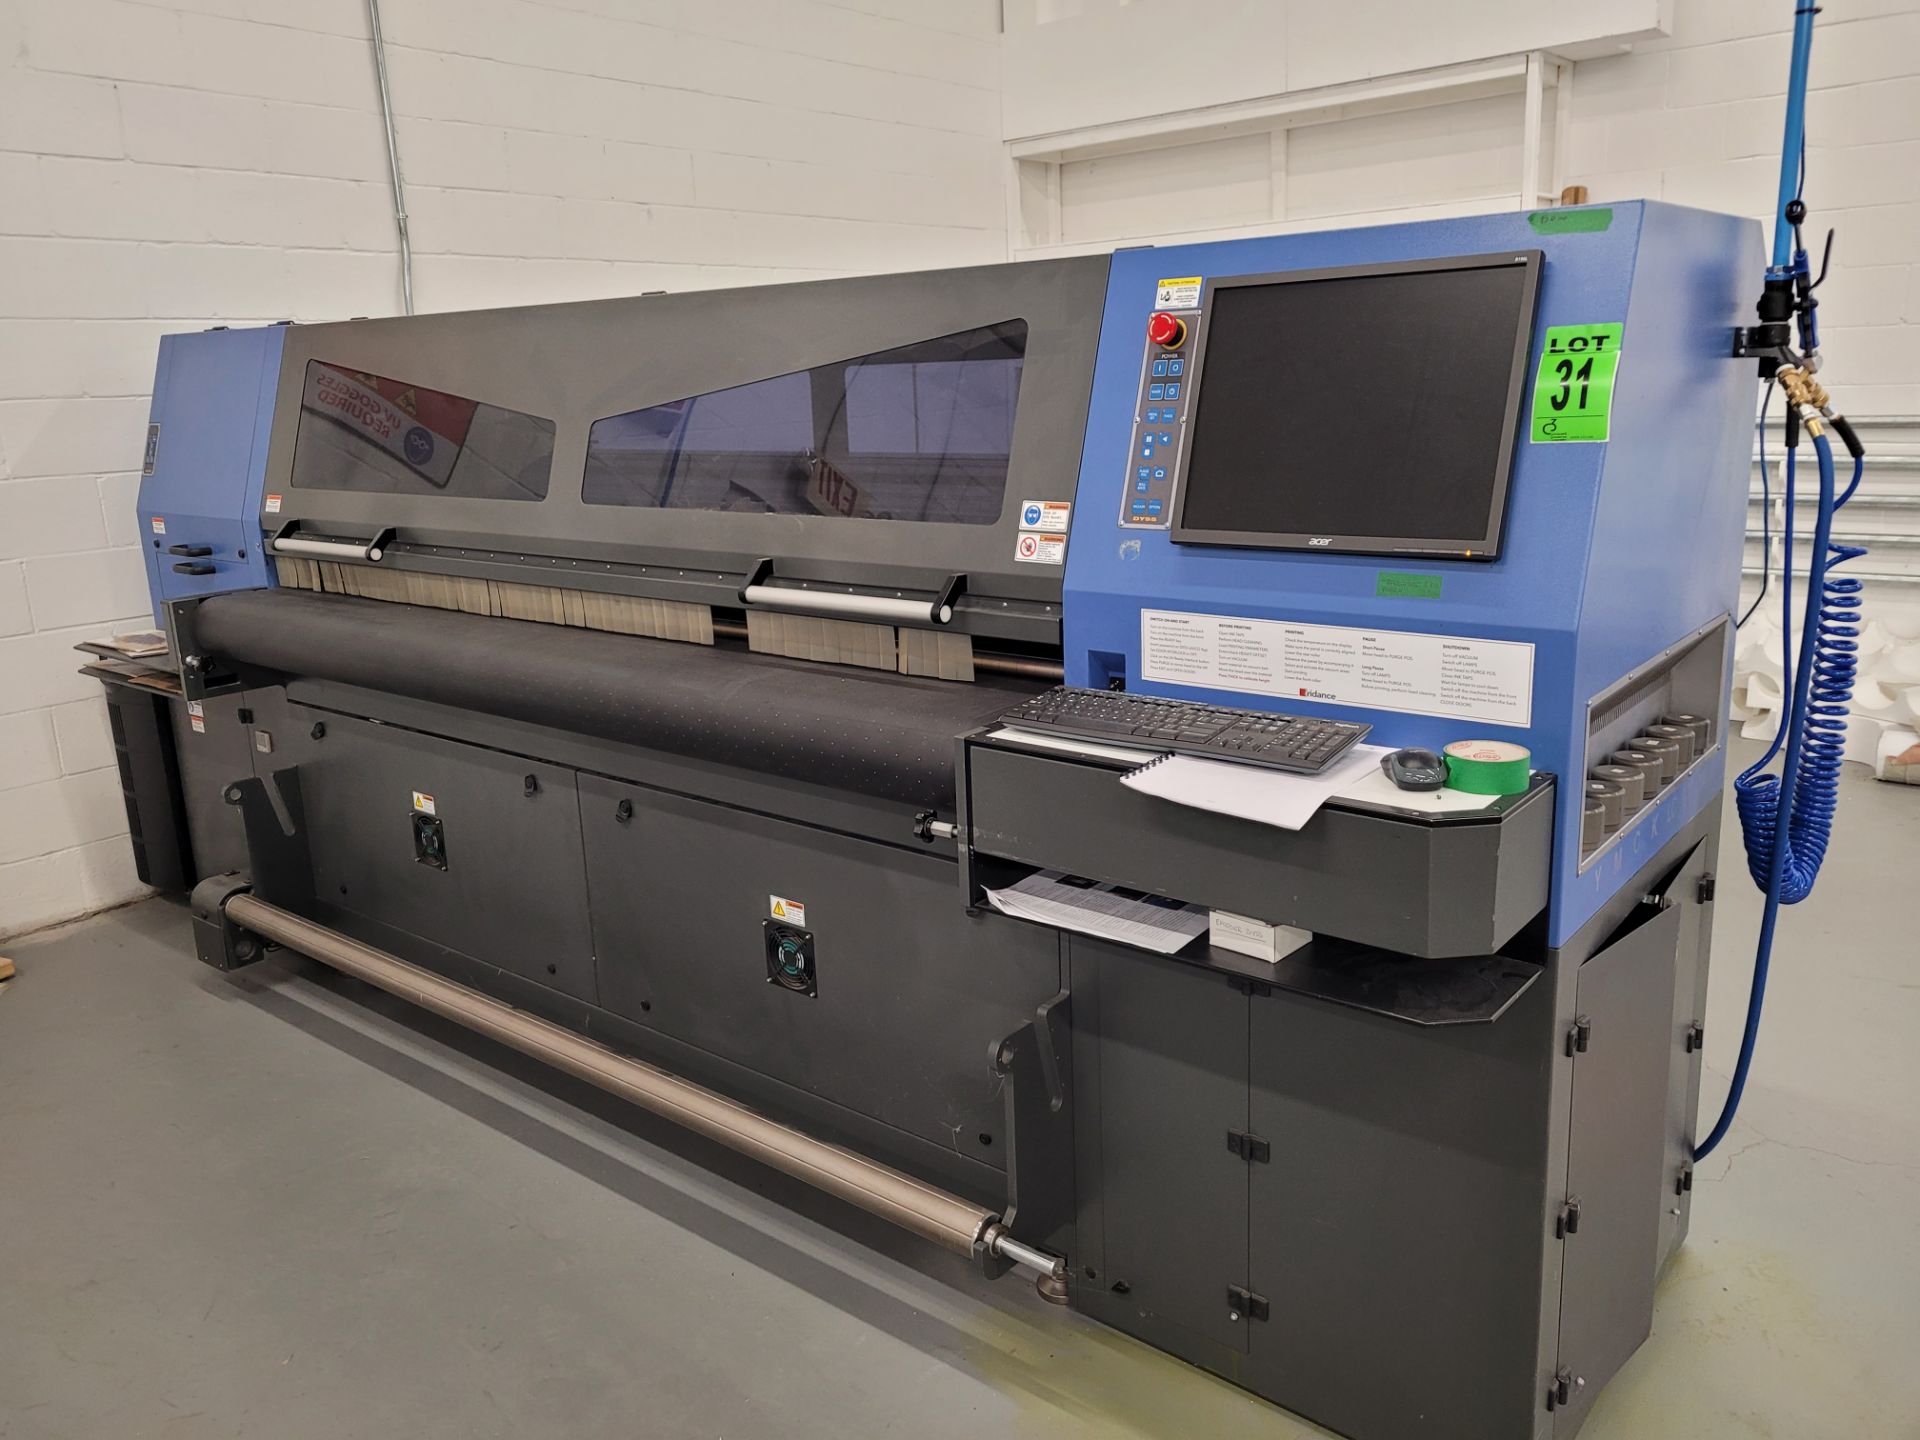 DYSS UV Printing Machine mod. Lasco & Apollo, ser. 221674RR000100264, 220V, includes conveyors and - Image 2 of 37